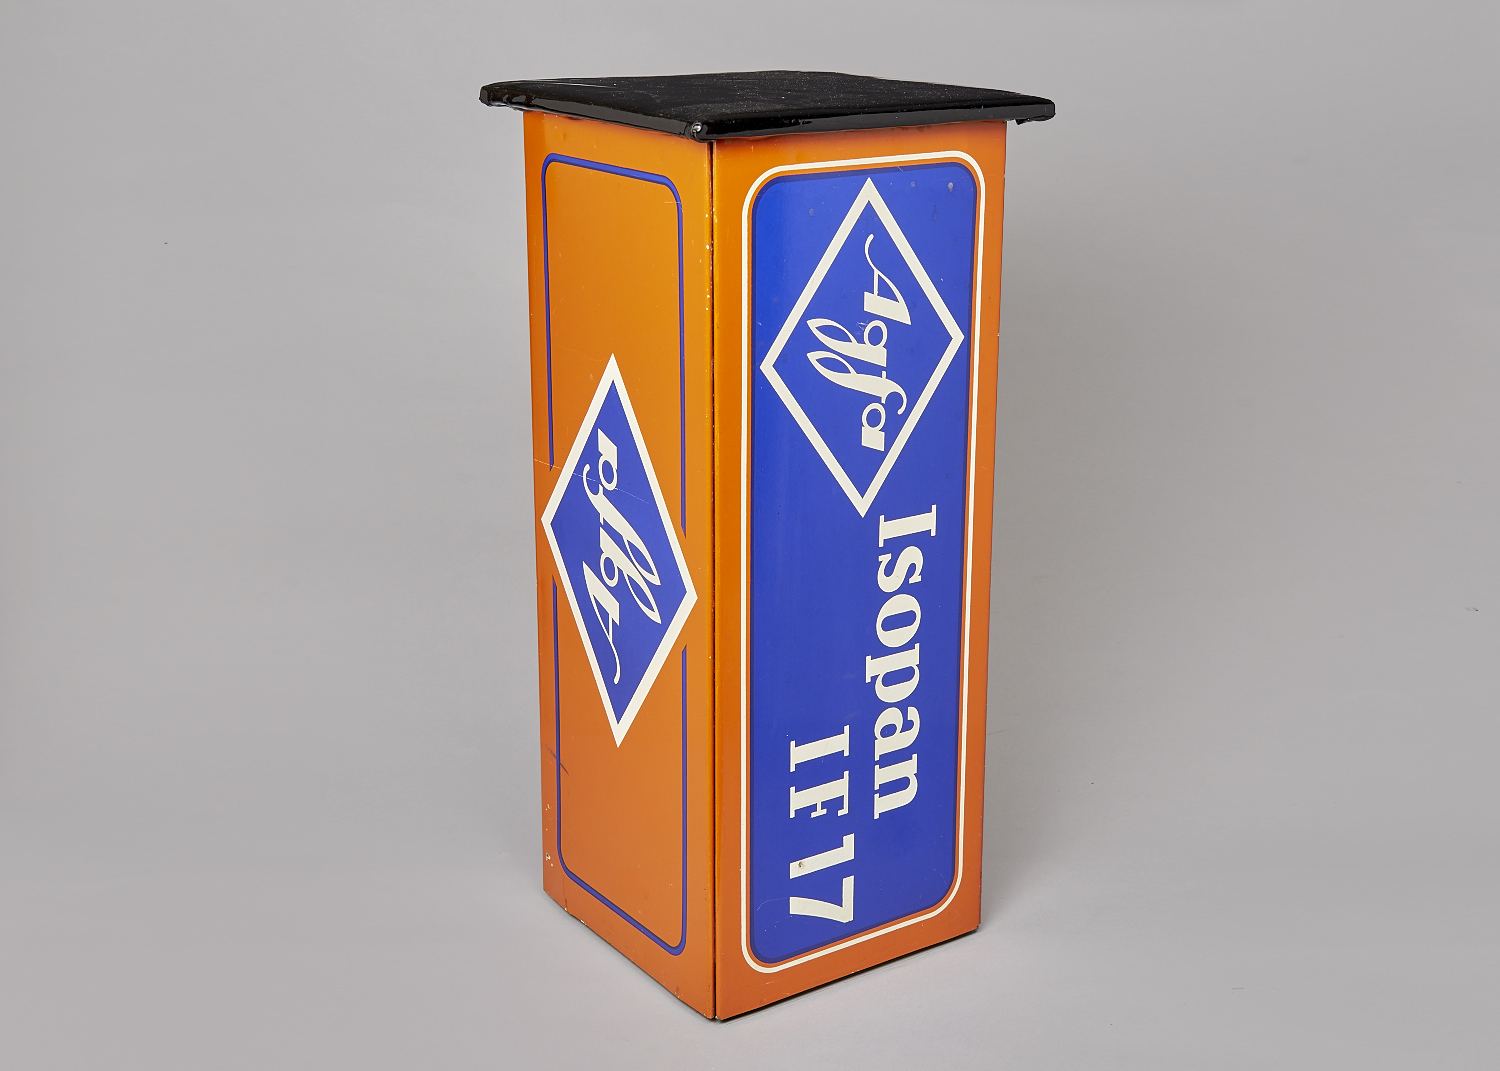 An Agfa enamelled tinplate Promotional Stool, in the form of a box of Isopan IF17/ISS21 roll film,